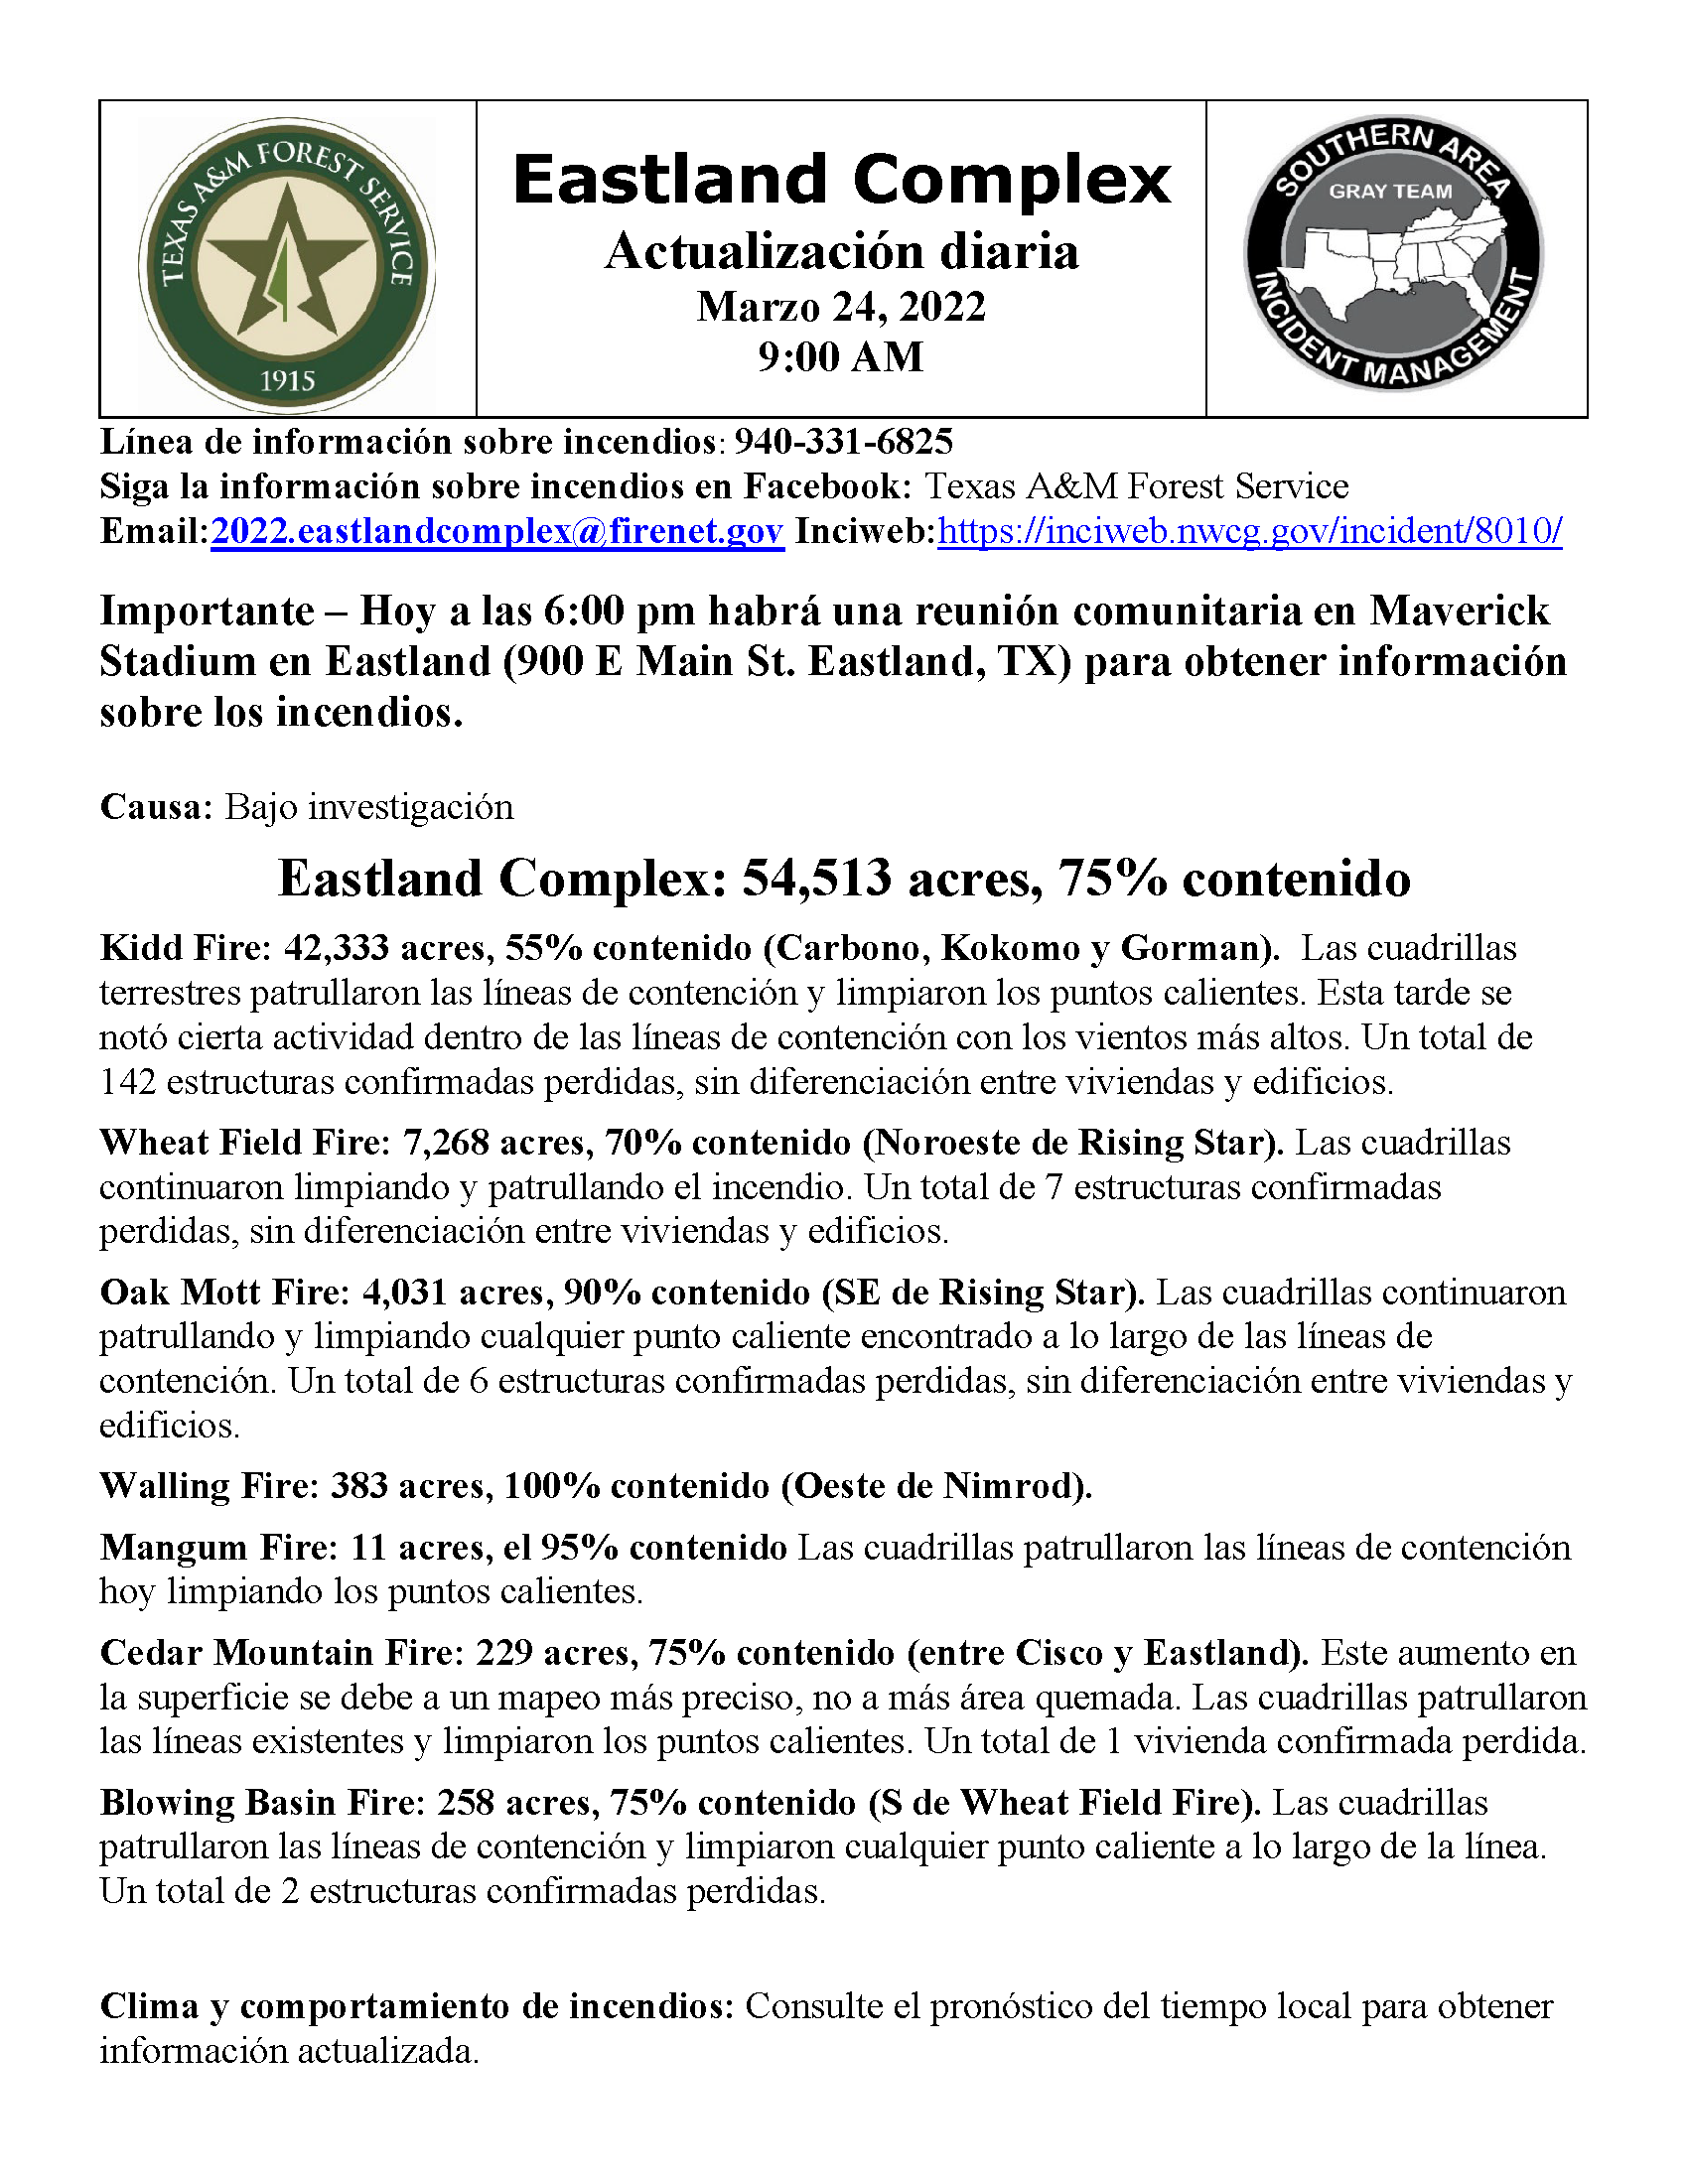 The document contains the daily update of the Eastland Complex fire, in spanish.